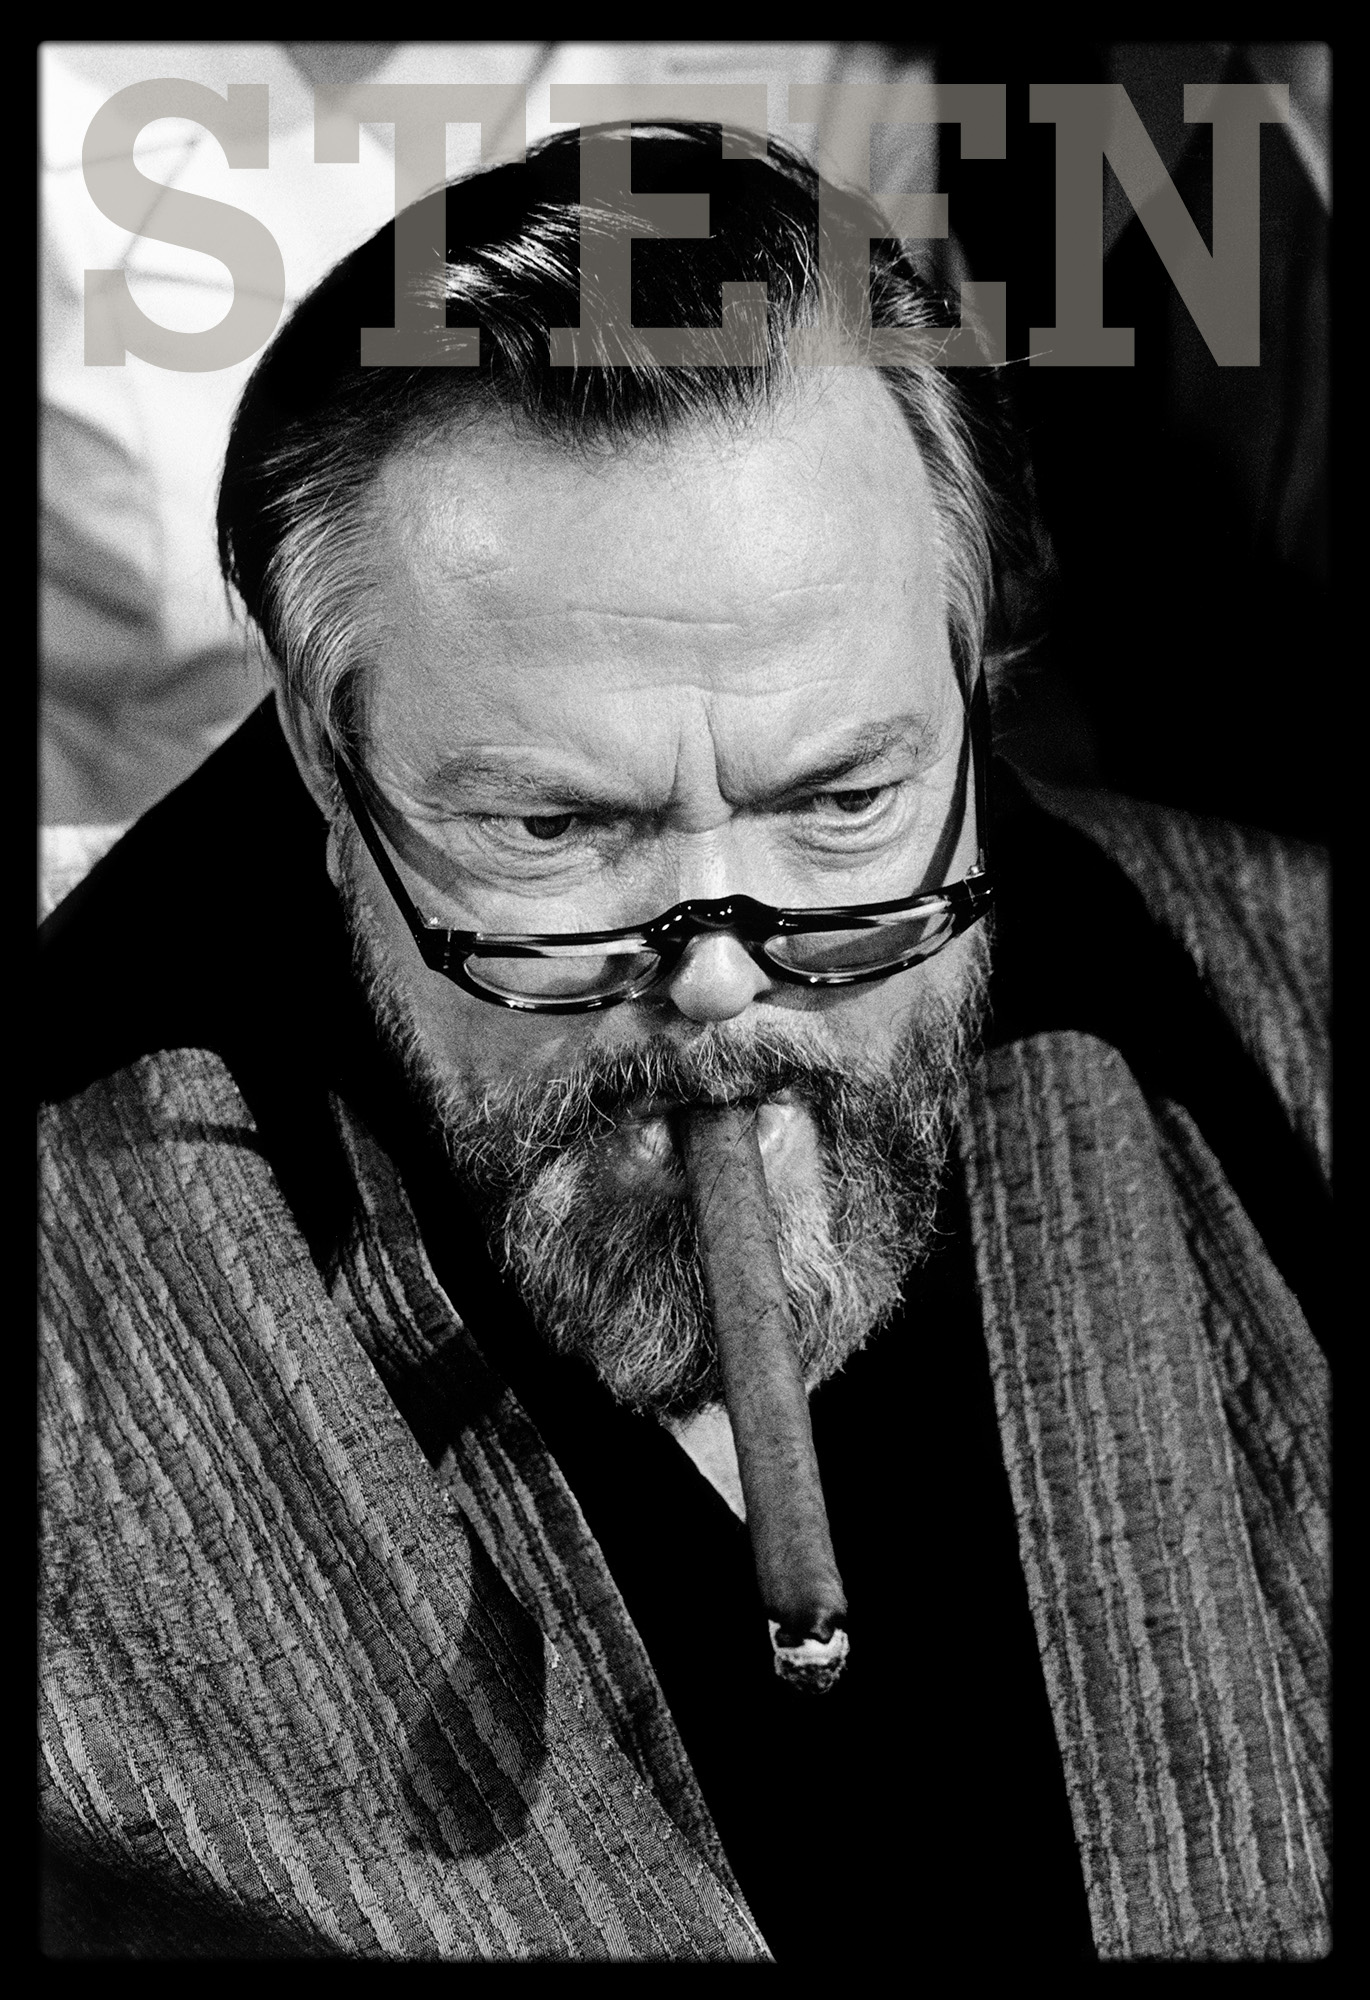 An exclusive limited edition photograph of Orson Welles by British photographer David Steen.